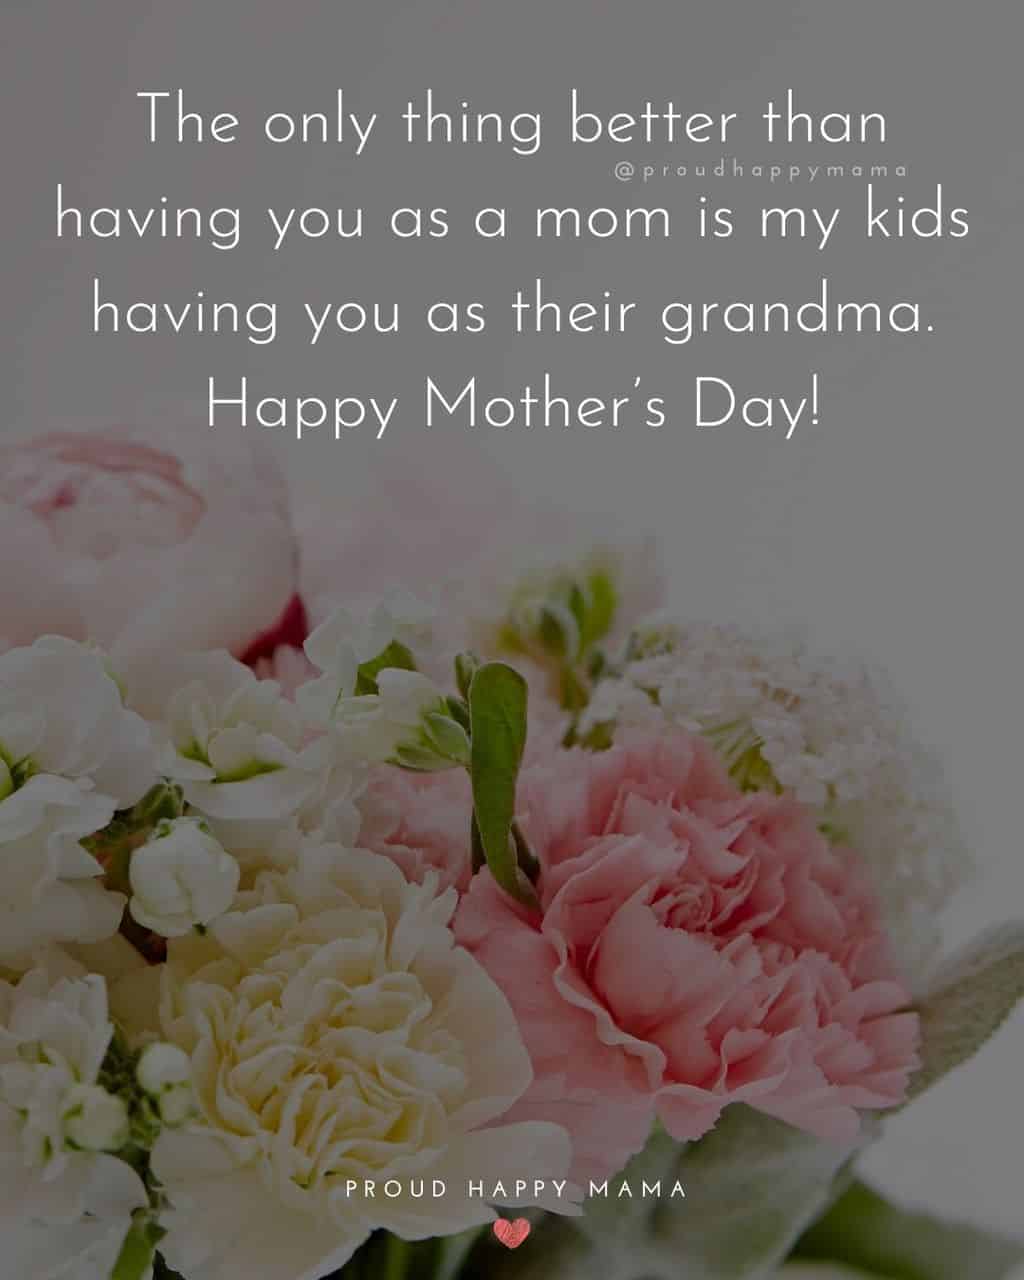 Happy Mothers Day Quotes To Grandma - The only thing better than having you as a mom is my kids having you as their